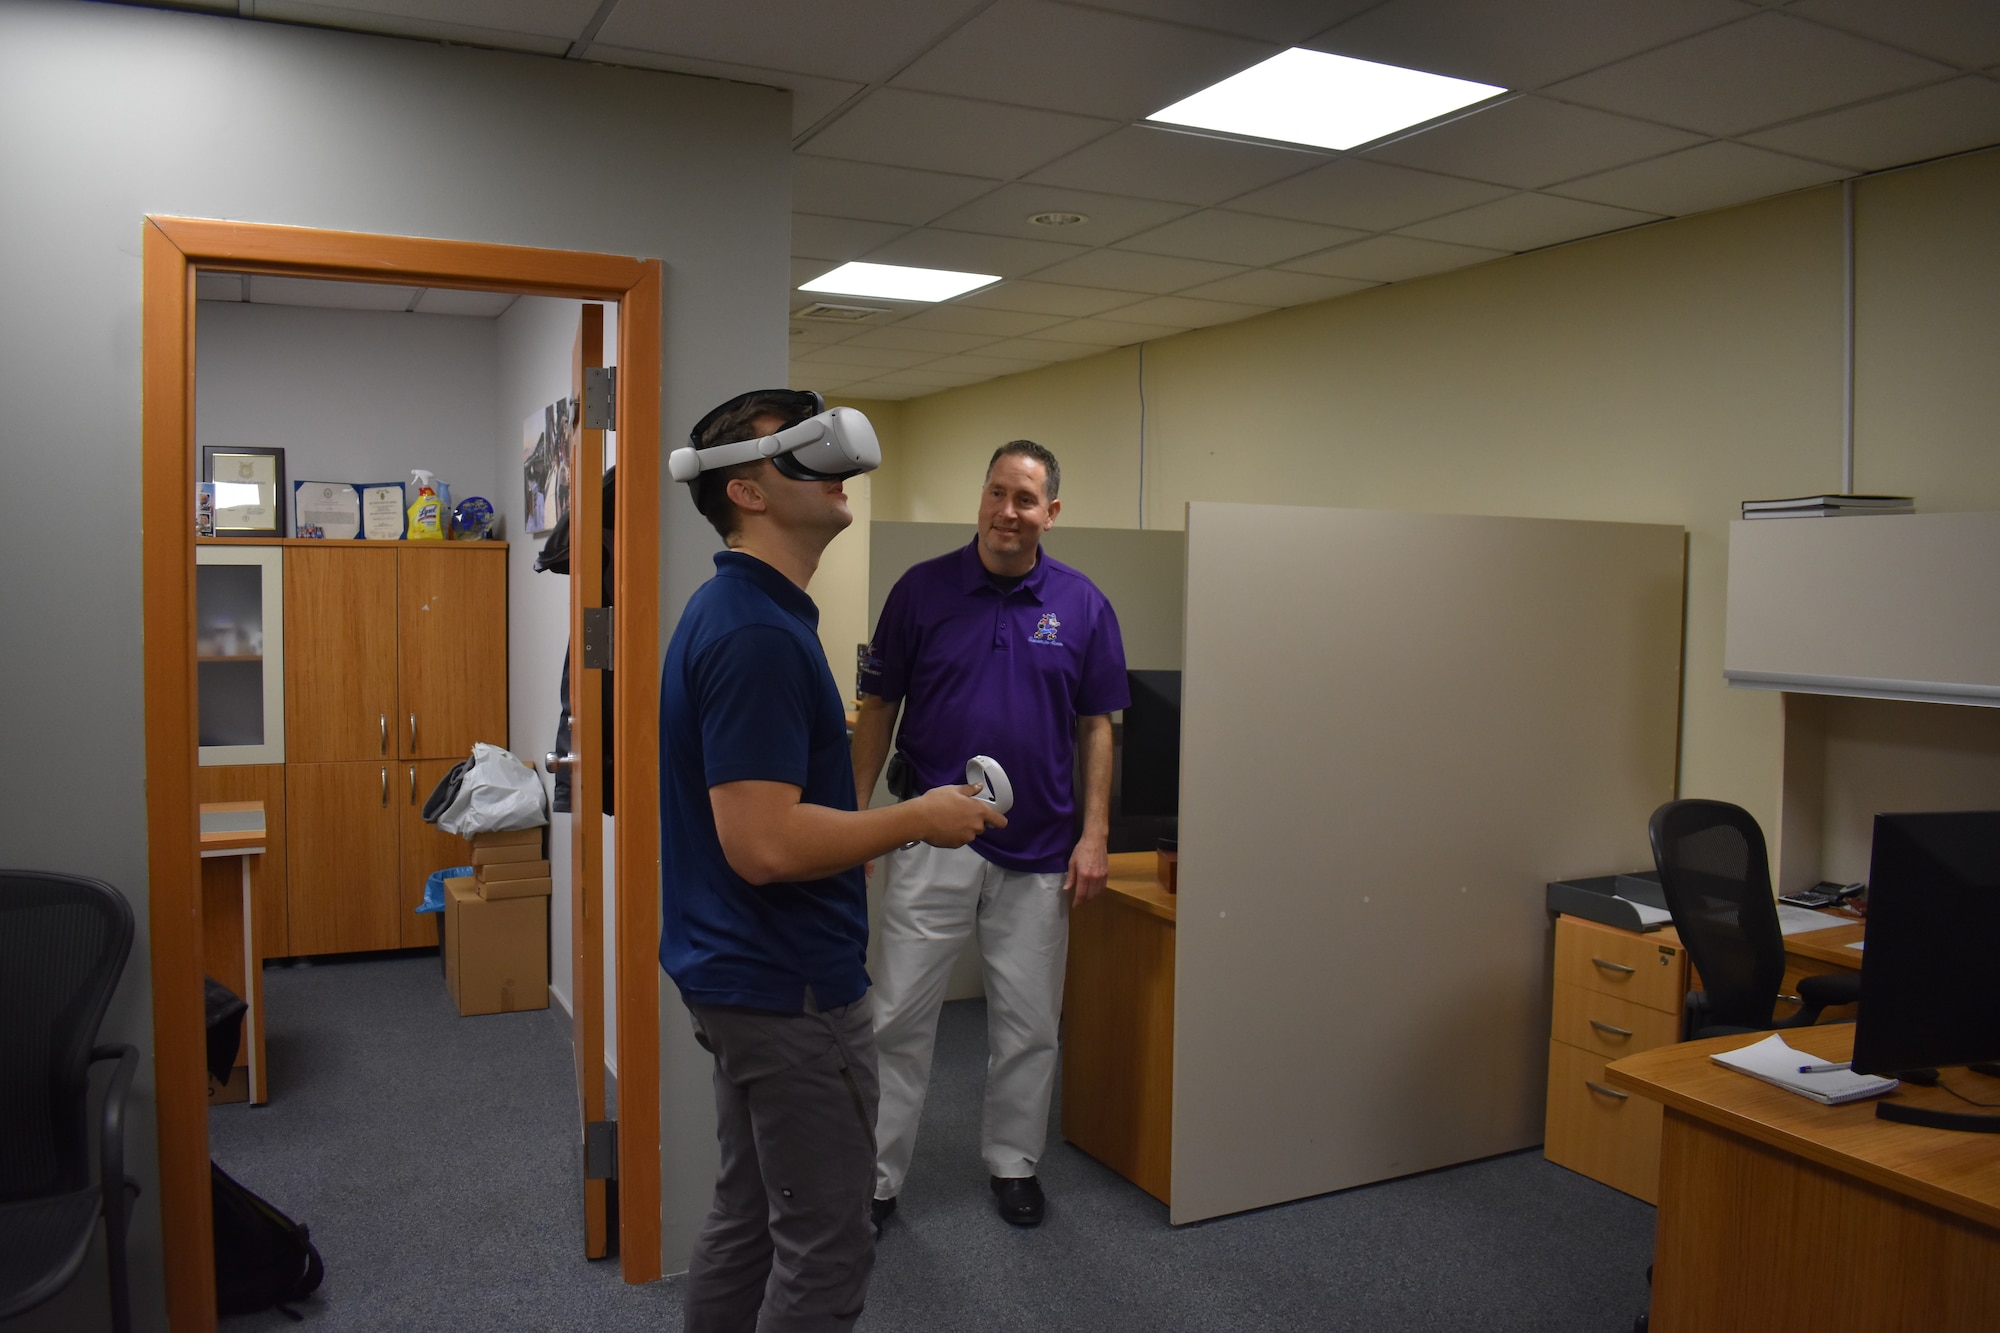 Senior Airman Houston Comer, 425th Air Base Squadron base defense operations center controller, takes a virtual tour of the apartments in Izmir via a virtual reality headset, at the housing office at the Izmir Consolidated Center, March 30, 2023.